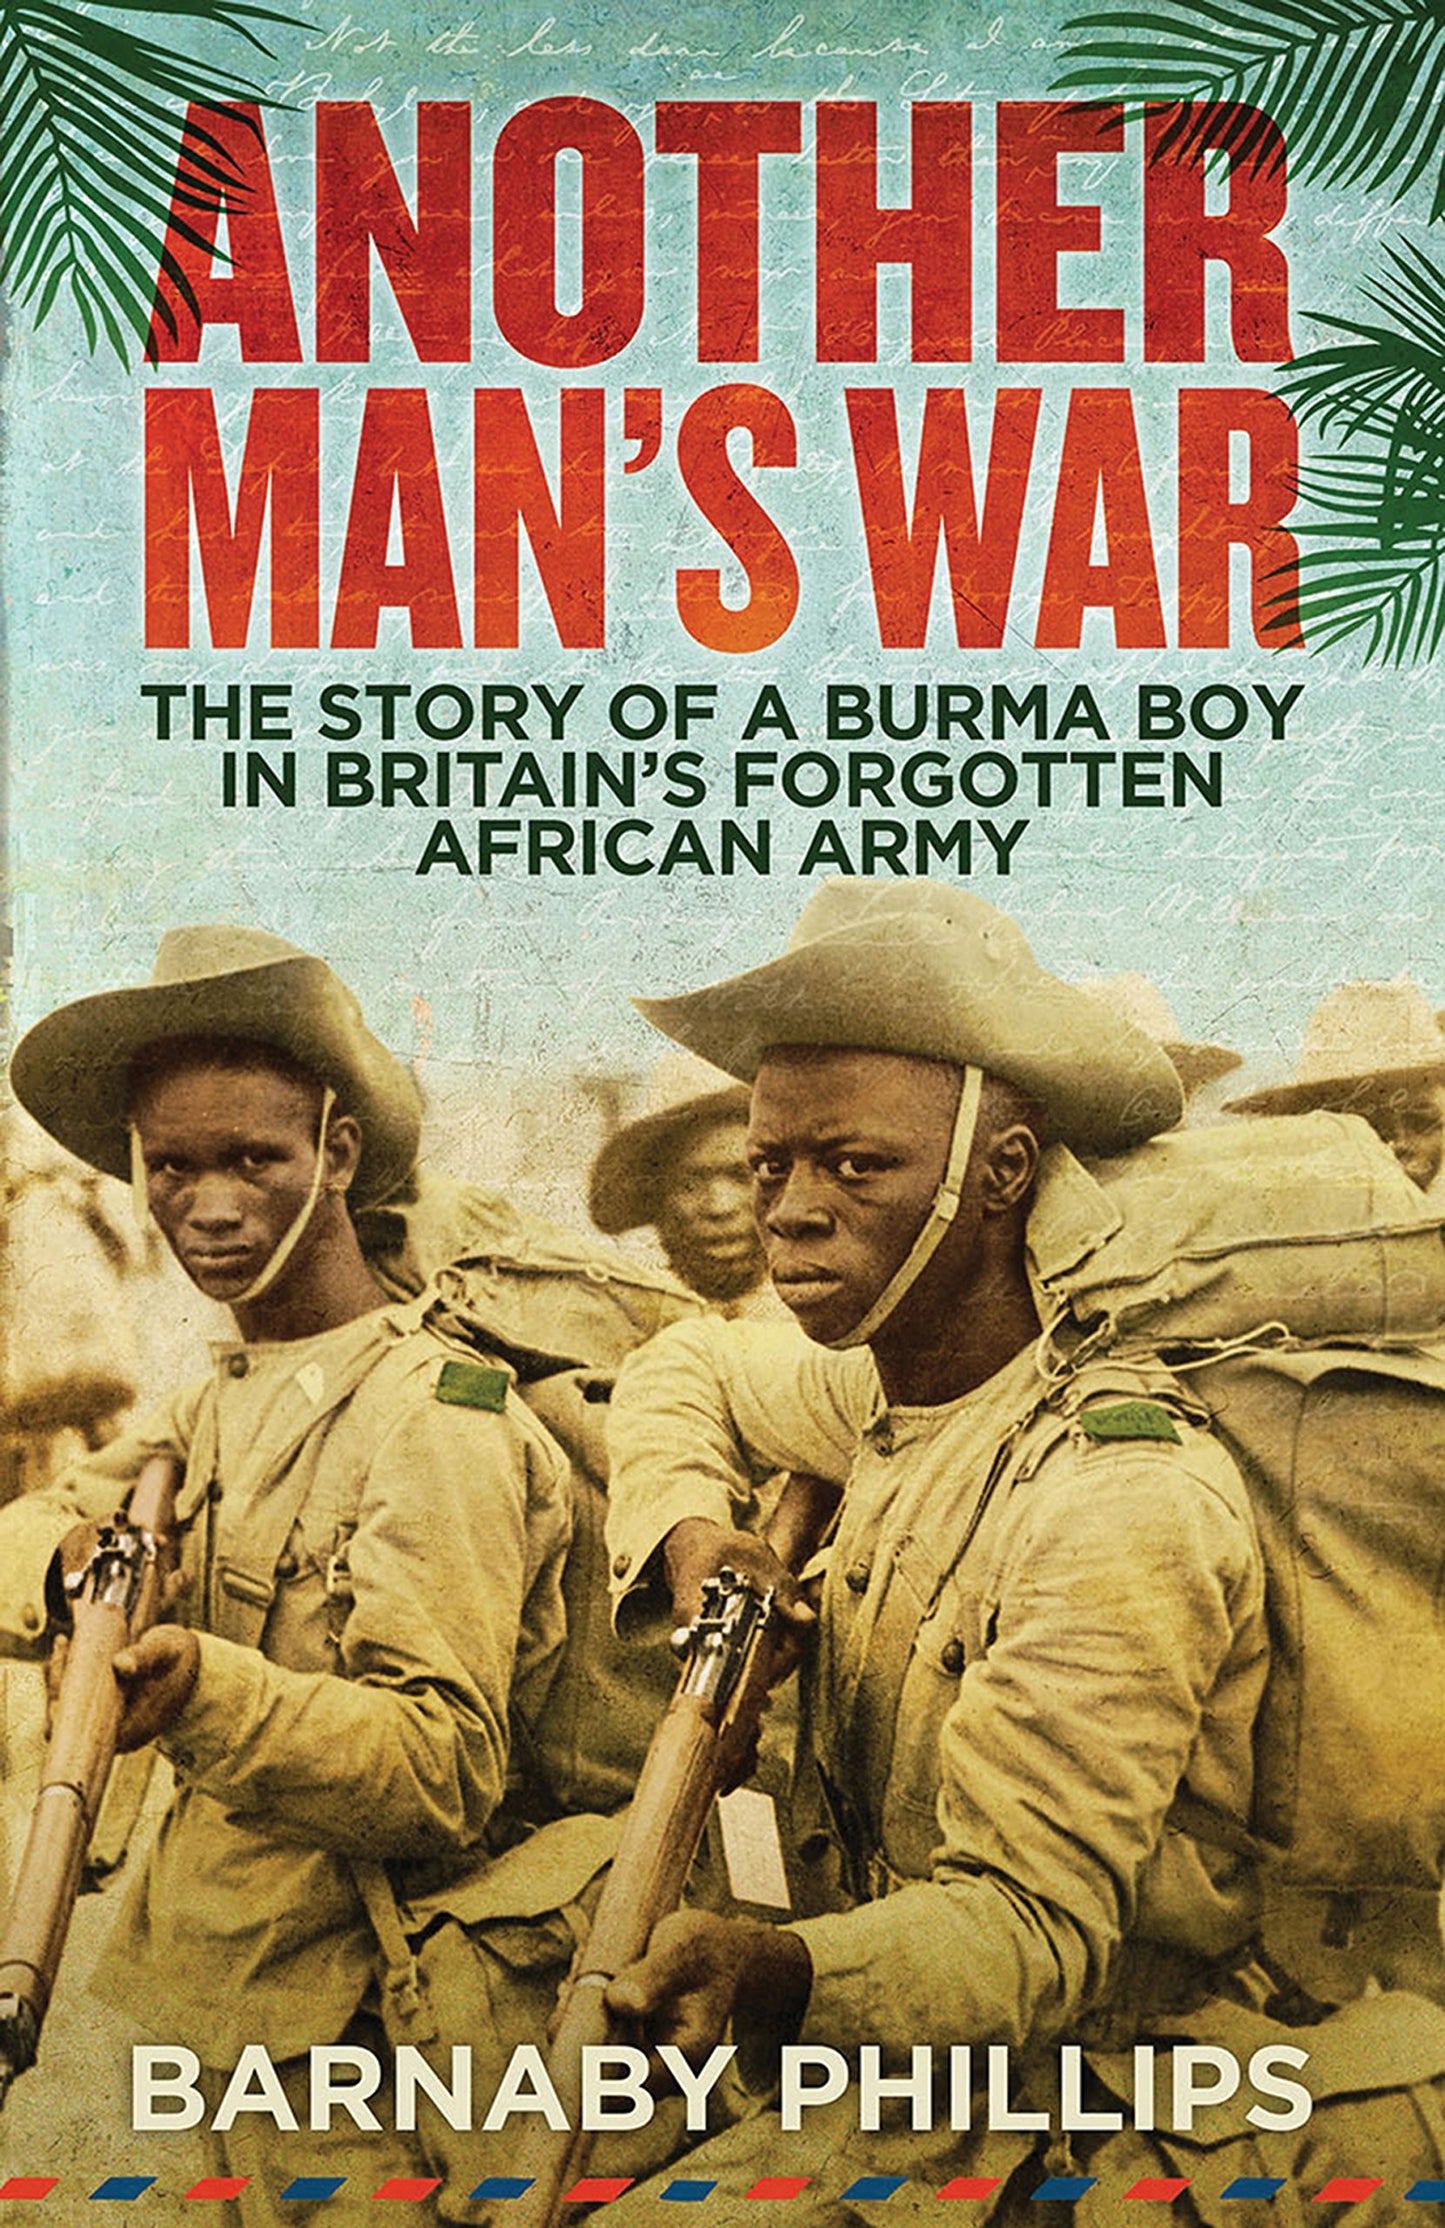 Another Man's War: The Story of a Burma Boy in Britain's Forgotten Army [Hardcover] Phillips, Barnaby